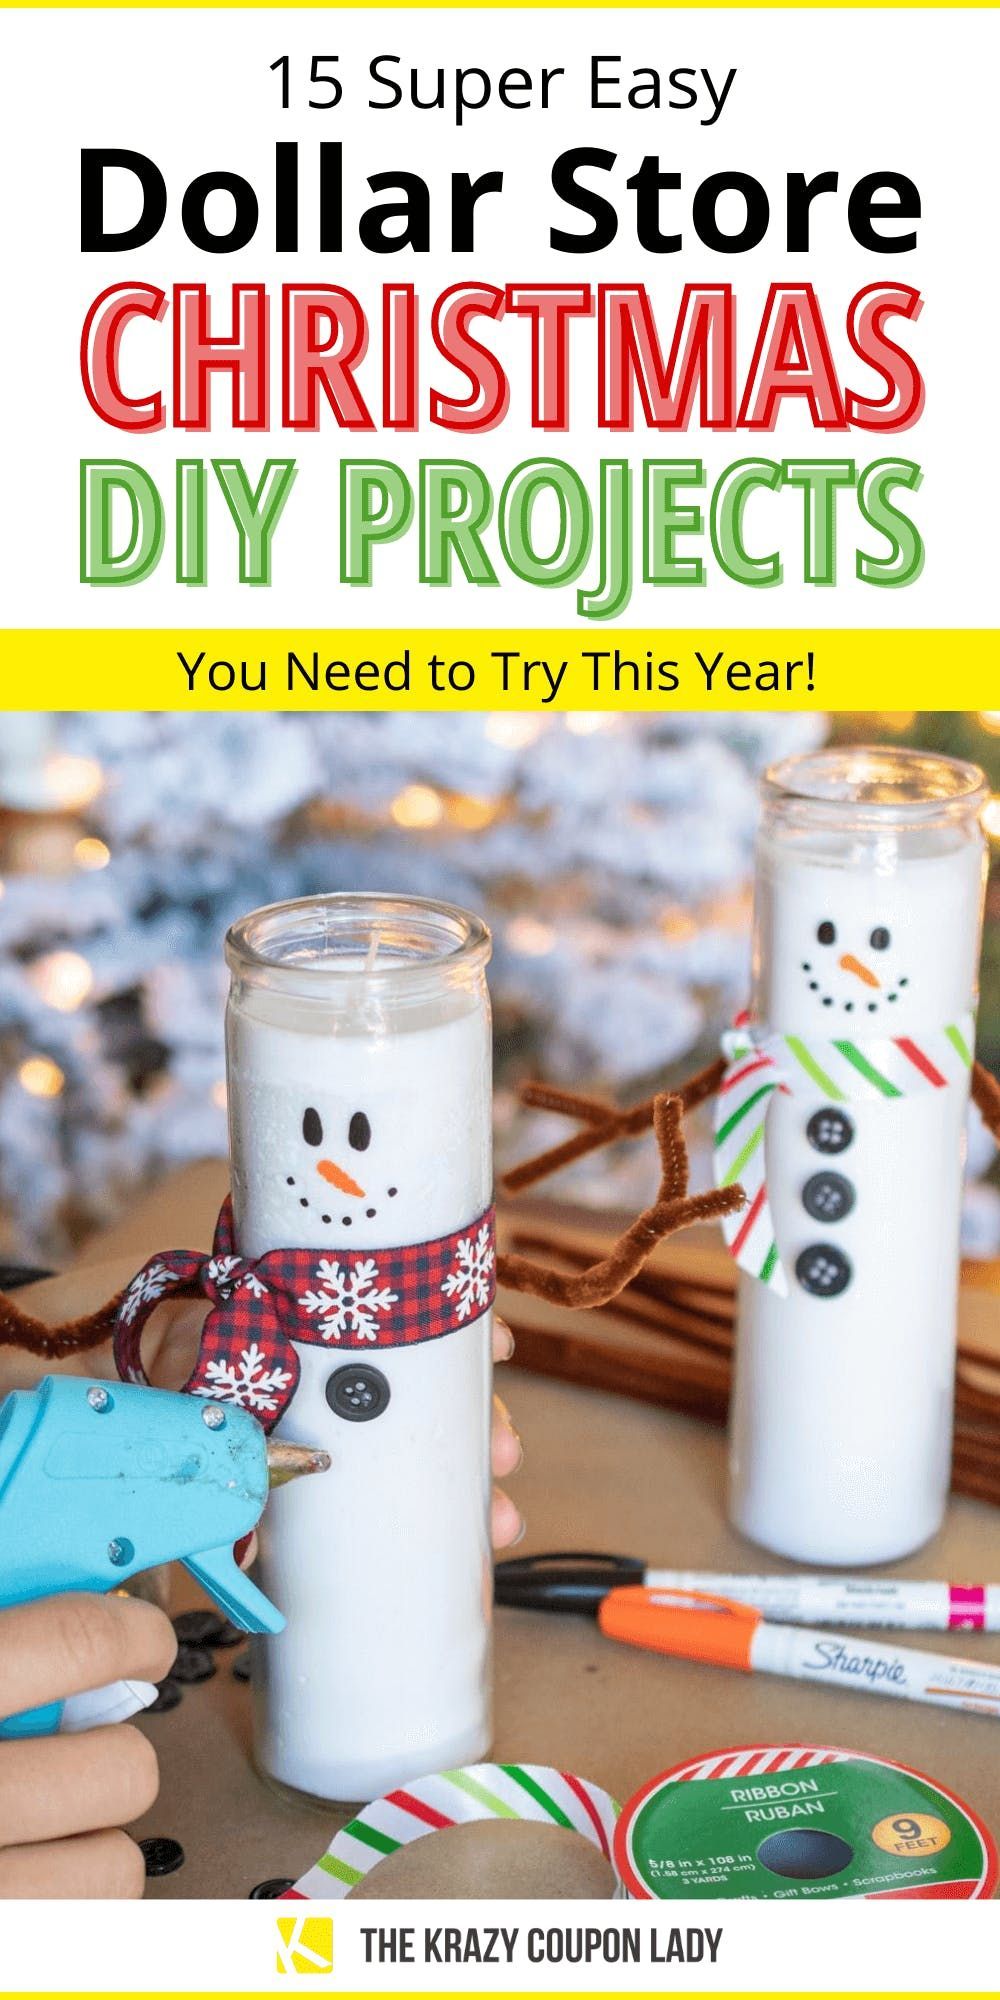 15 Dollar Store Christmas DIY Projects Anyone Can Do -   17 xmas crafts decorations ideas